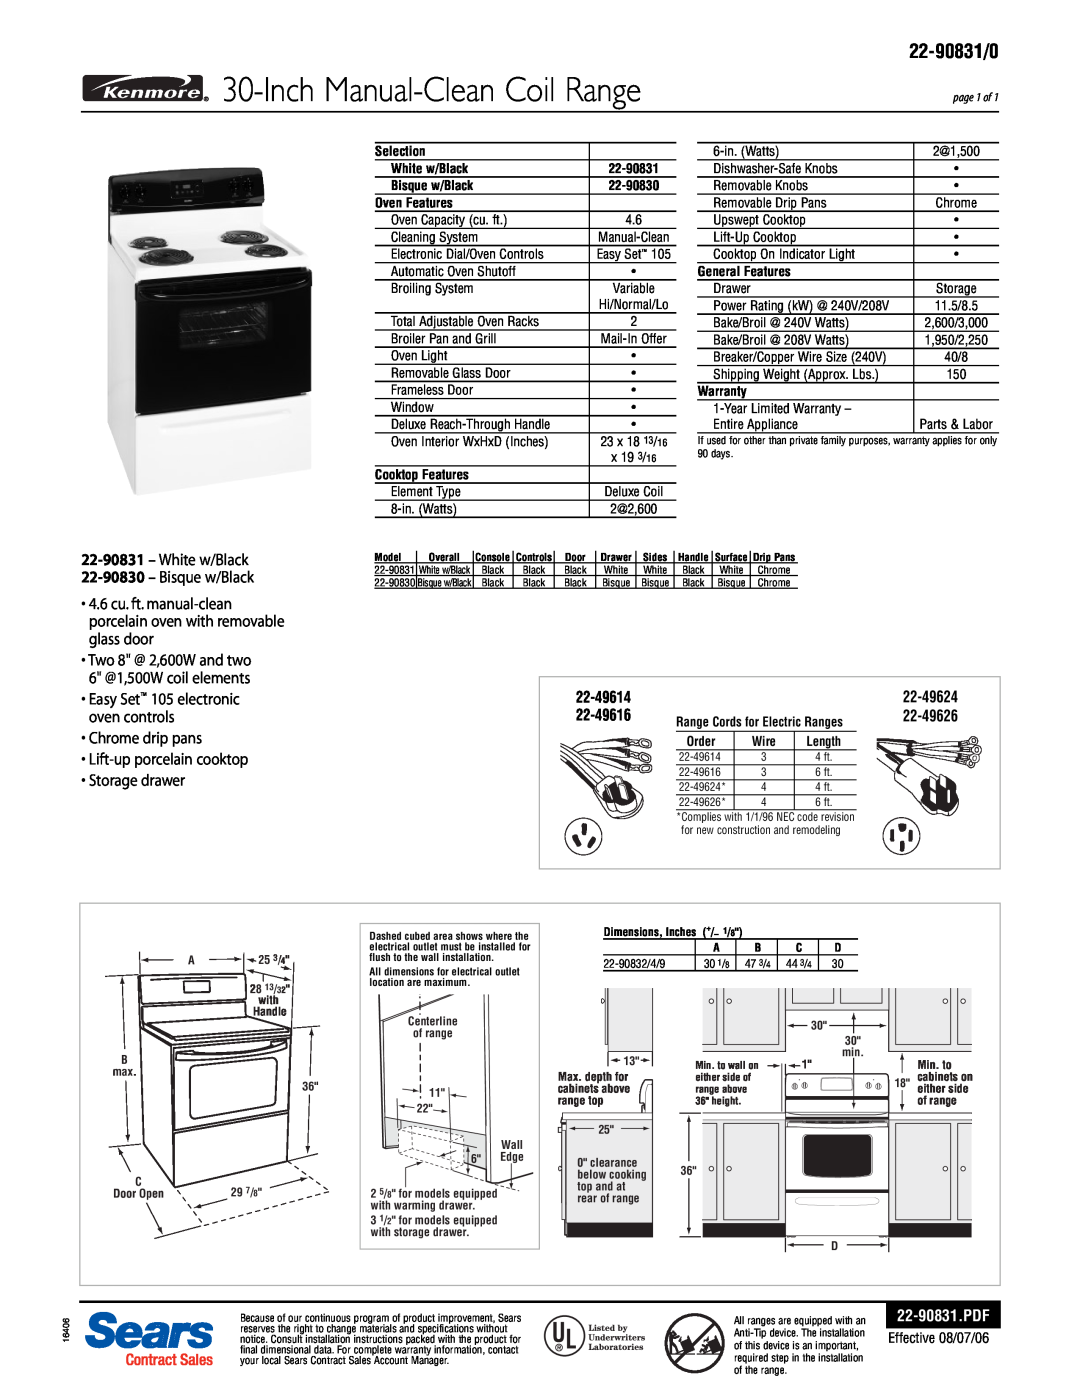 Kenmore specifications Inch Manual-Clean Coil Range, 22-90831/0, White w/Black 22-90830 - Bisque w/Black, 22-49624 